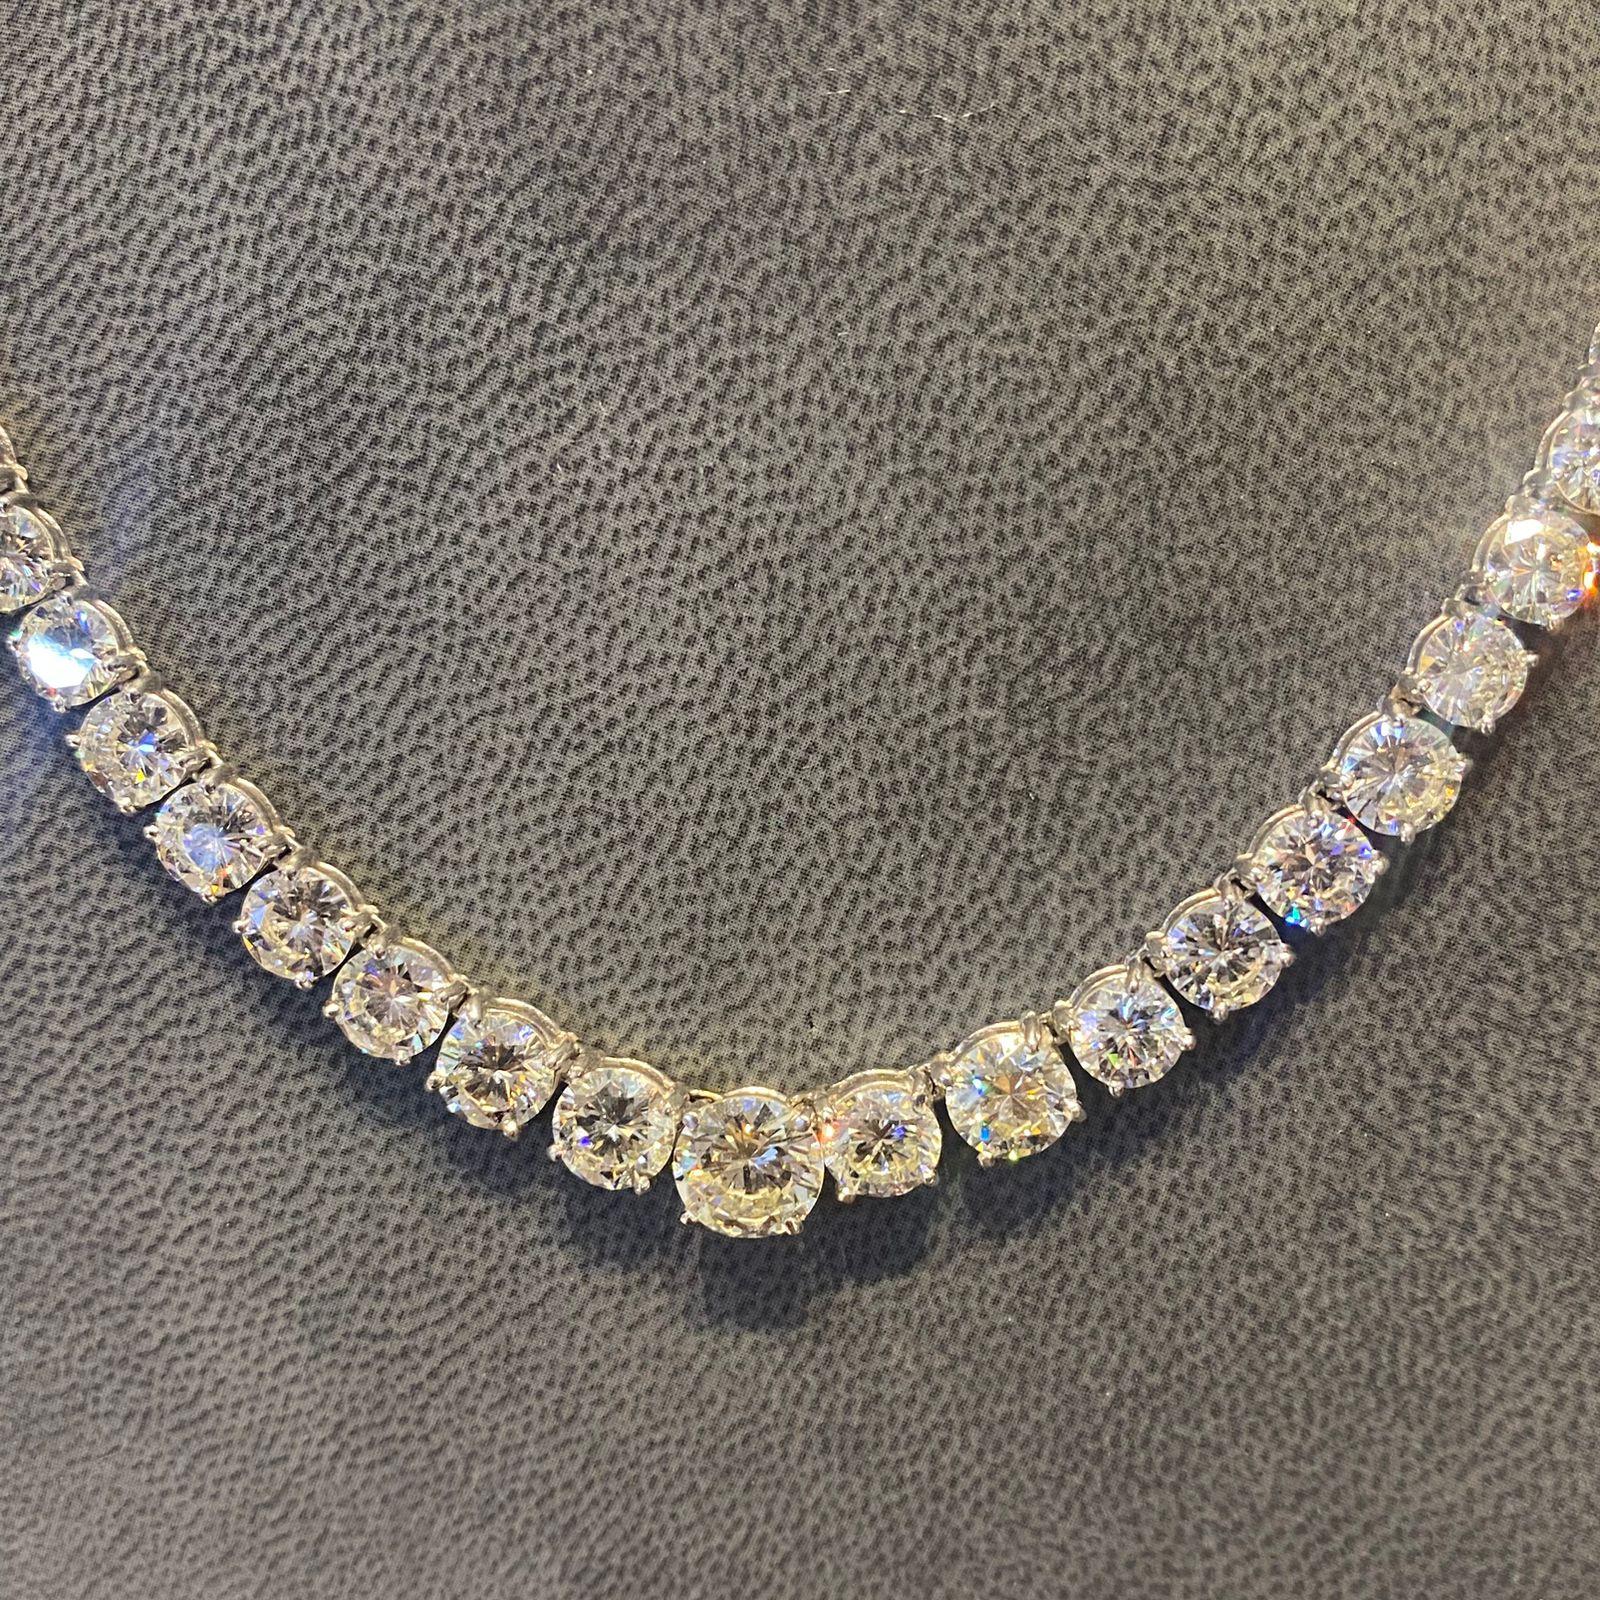 Graduated Diamond Rivière Necklace In Excellent Condition For Sale In New York, NY